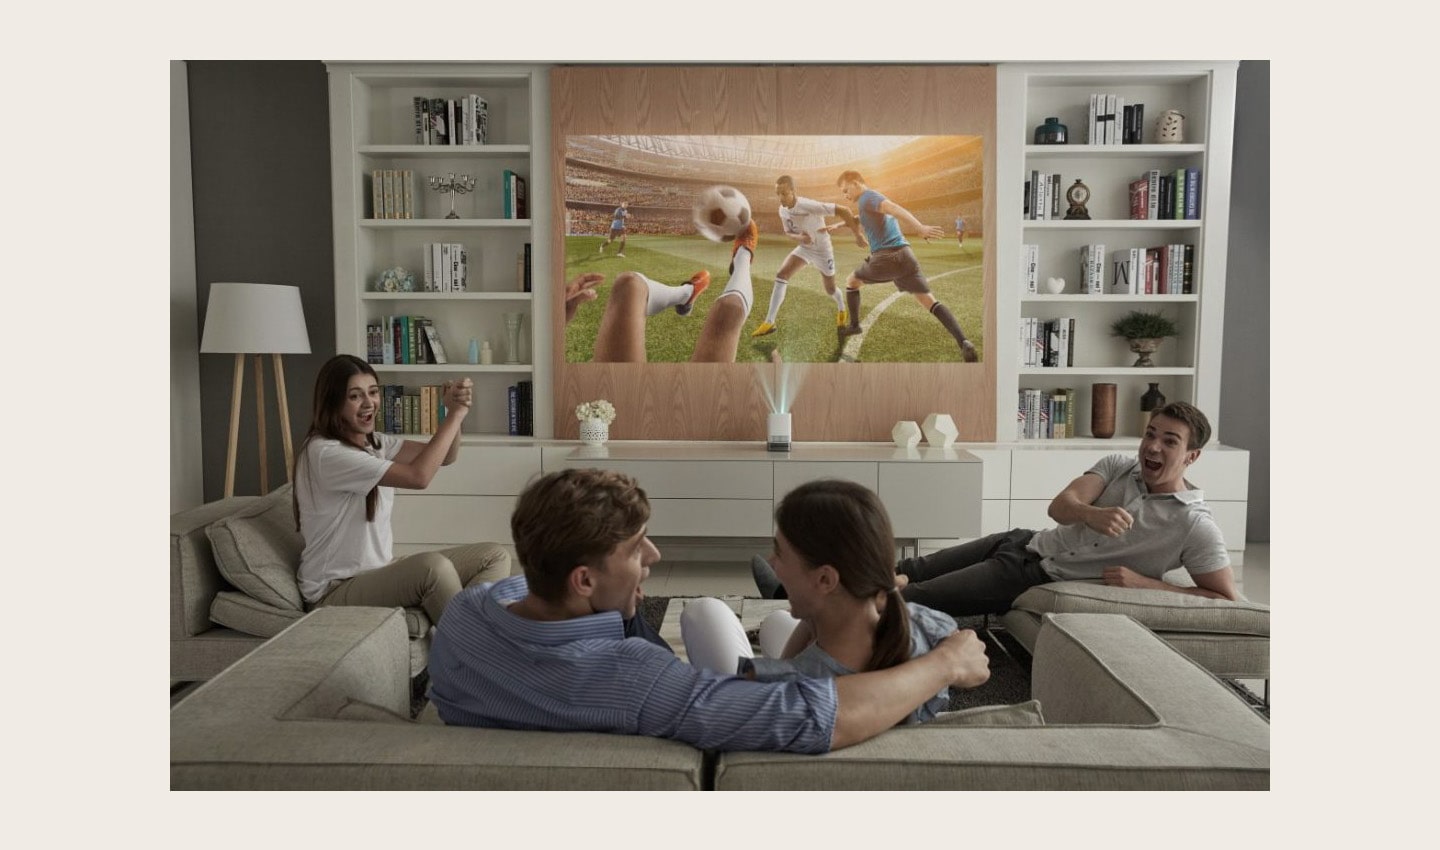 Four people sitting on couches enjoy watching a soccer game projected on the wall by the LG ProBeam Projector HF85J.